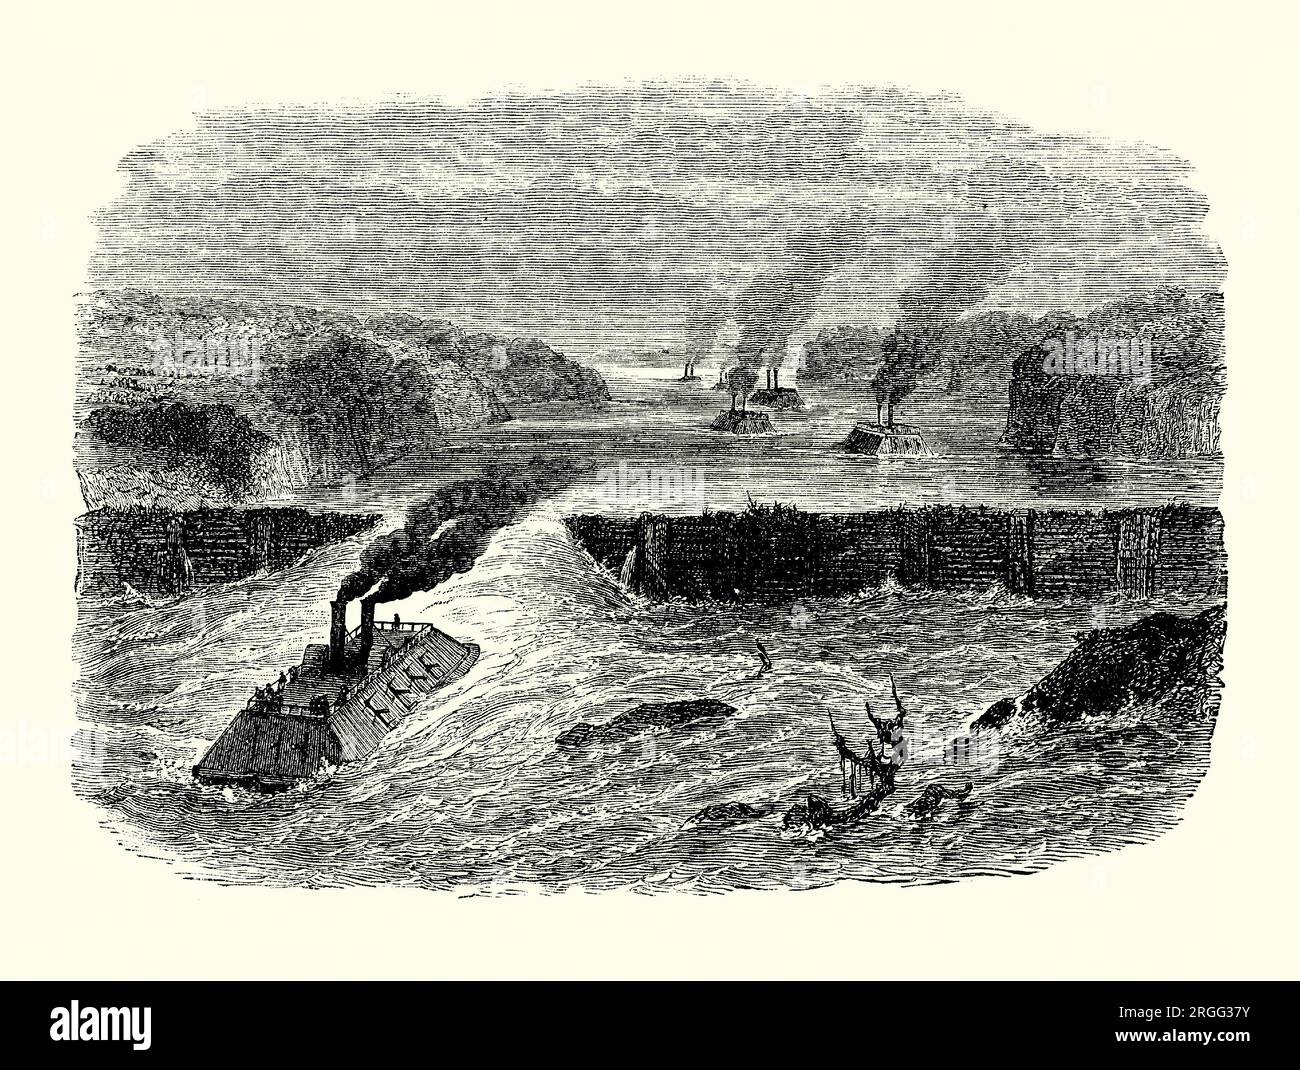 An old engraving of a Union naval vessel passing through Bailey's Dam, a timber dam on the Red River at Alexandria, Louisiana, USA, 1864, during the American Civil War. It is from an American history book of 1895. Built during the Red River Campaign, designed by Lieutenant Colonel Joseph Bailey, it allowed Mississippi River Squadron boats passage downstream over the Alexandria rapids (as shown here). In the 150-foot centre gap of the rock/timber dam four coal barges were anchored into the riverbed. The dam was breached when one barge was towed out of the way allowing to pass downstream. Stock Photo